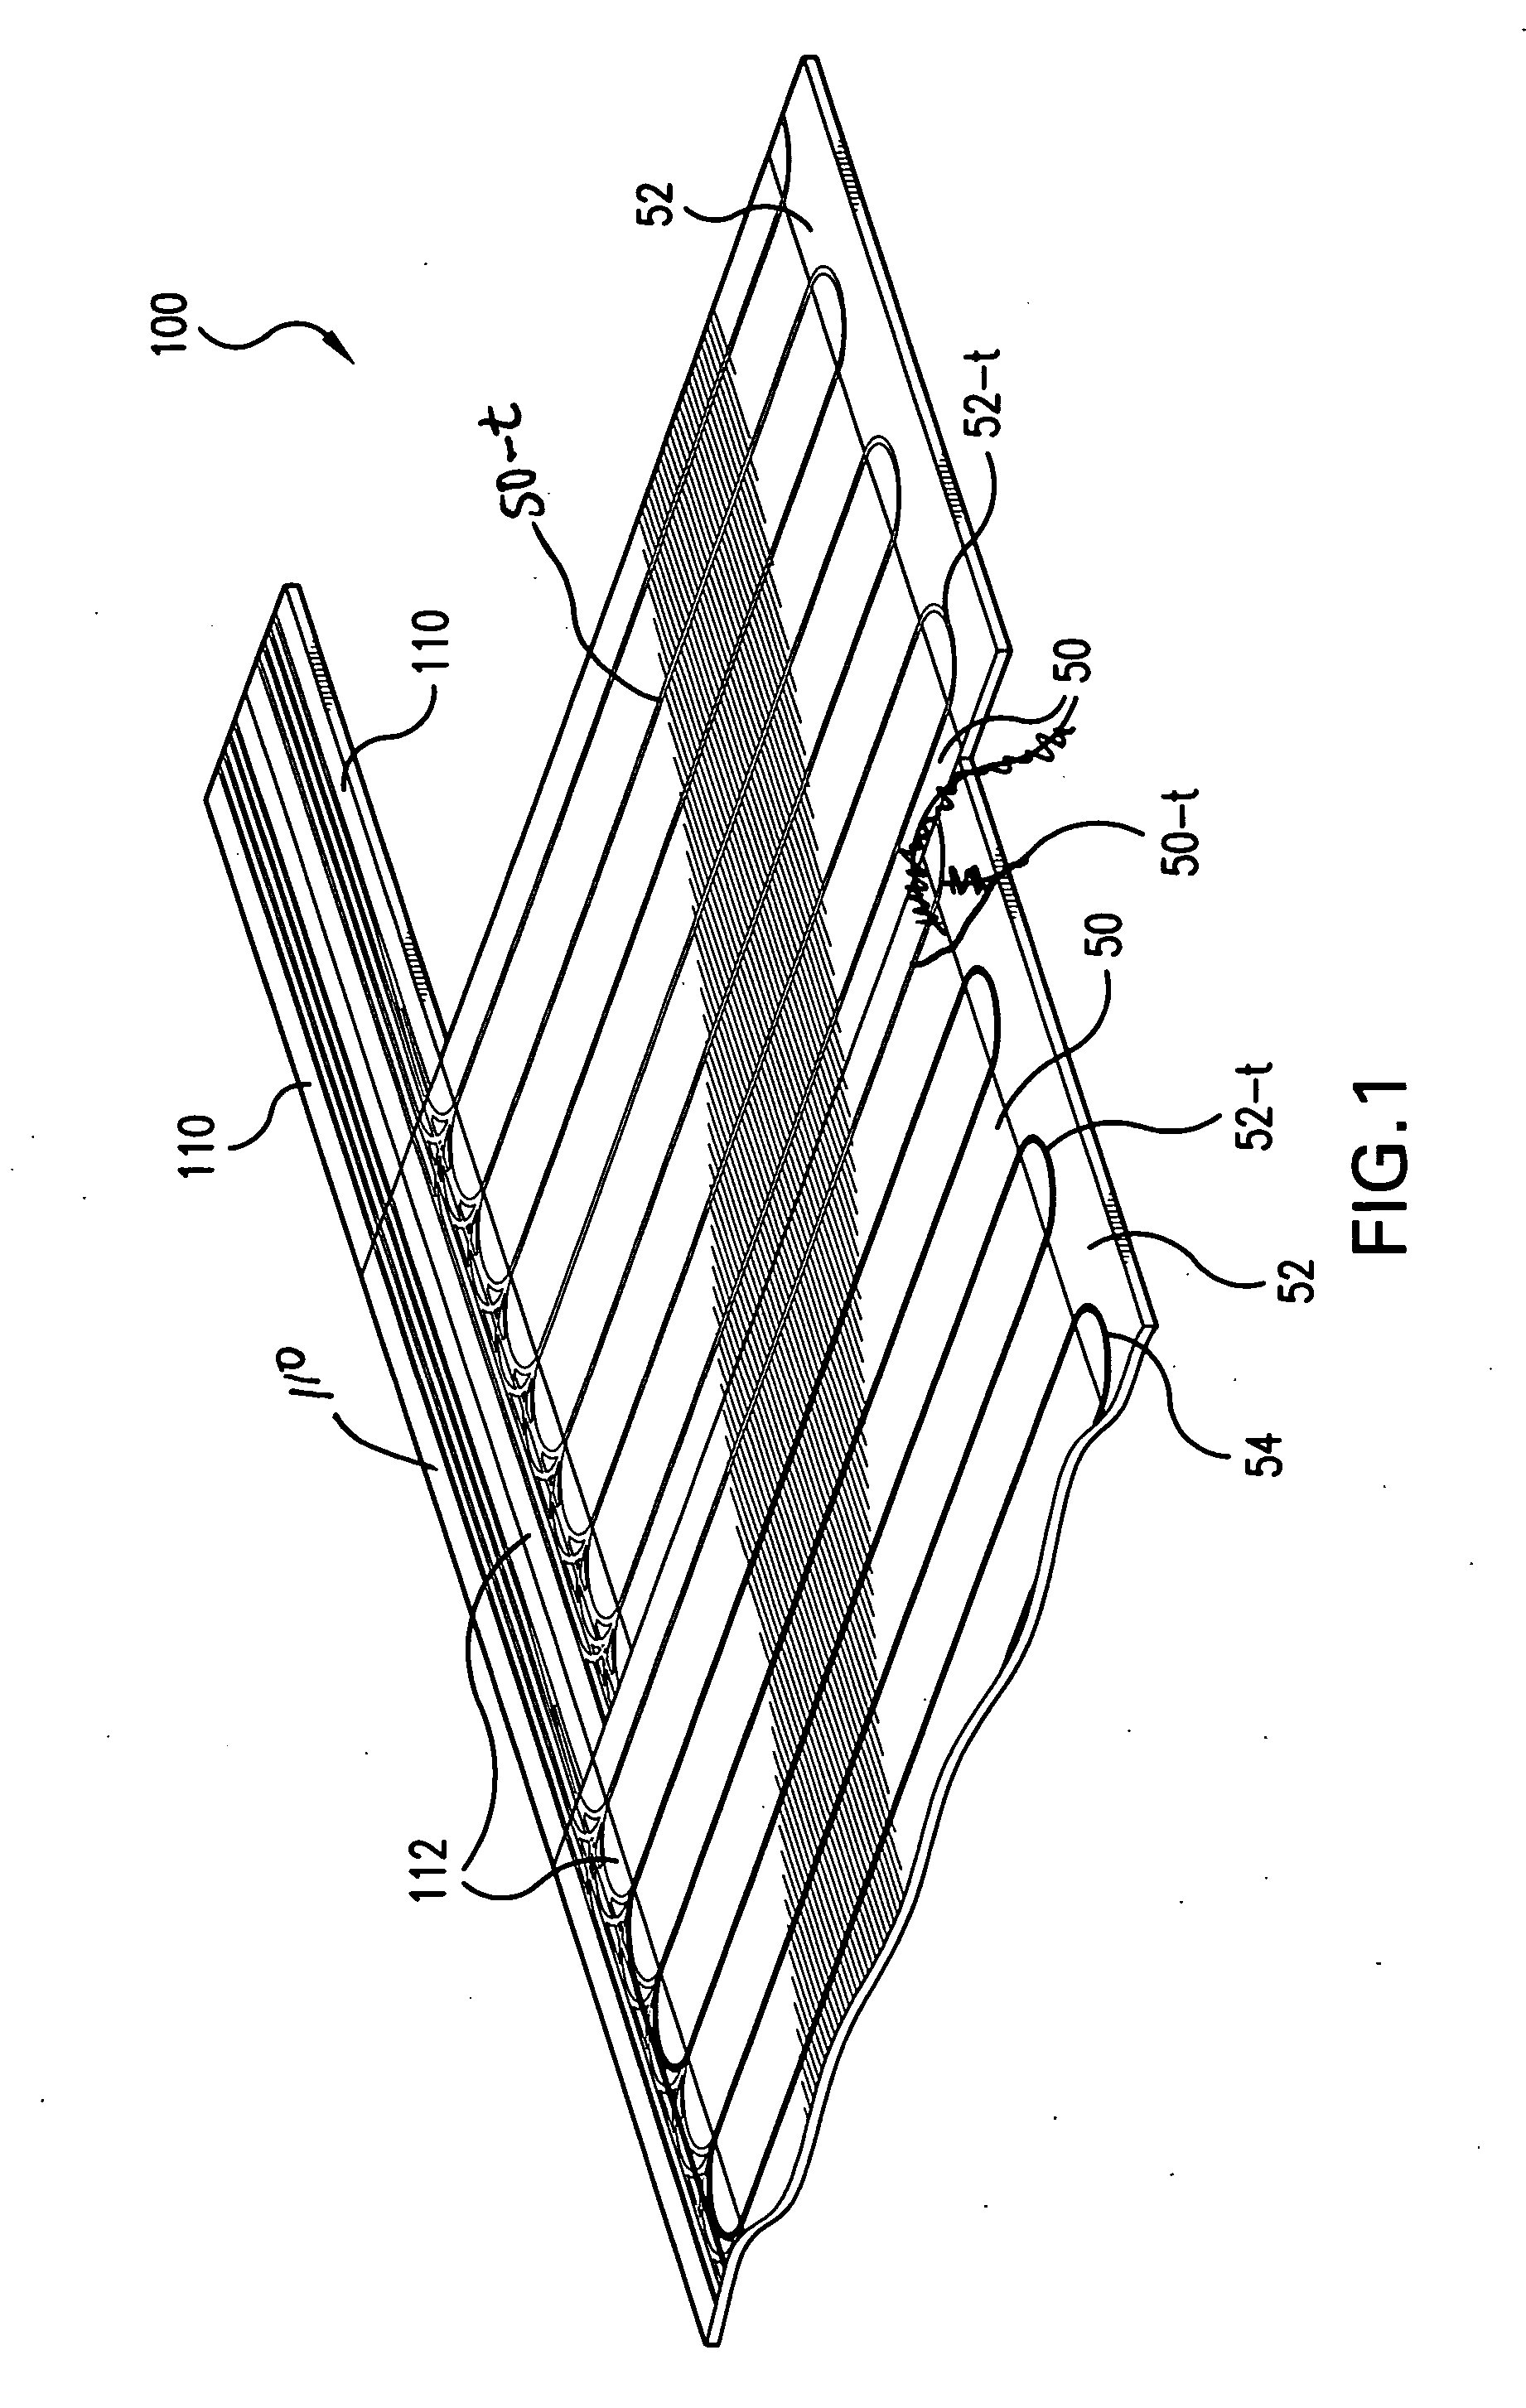 Radiant heating/cooling tubing substrate with in plane bus